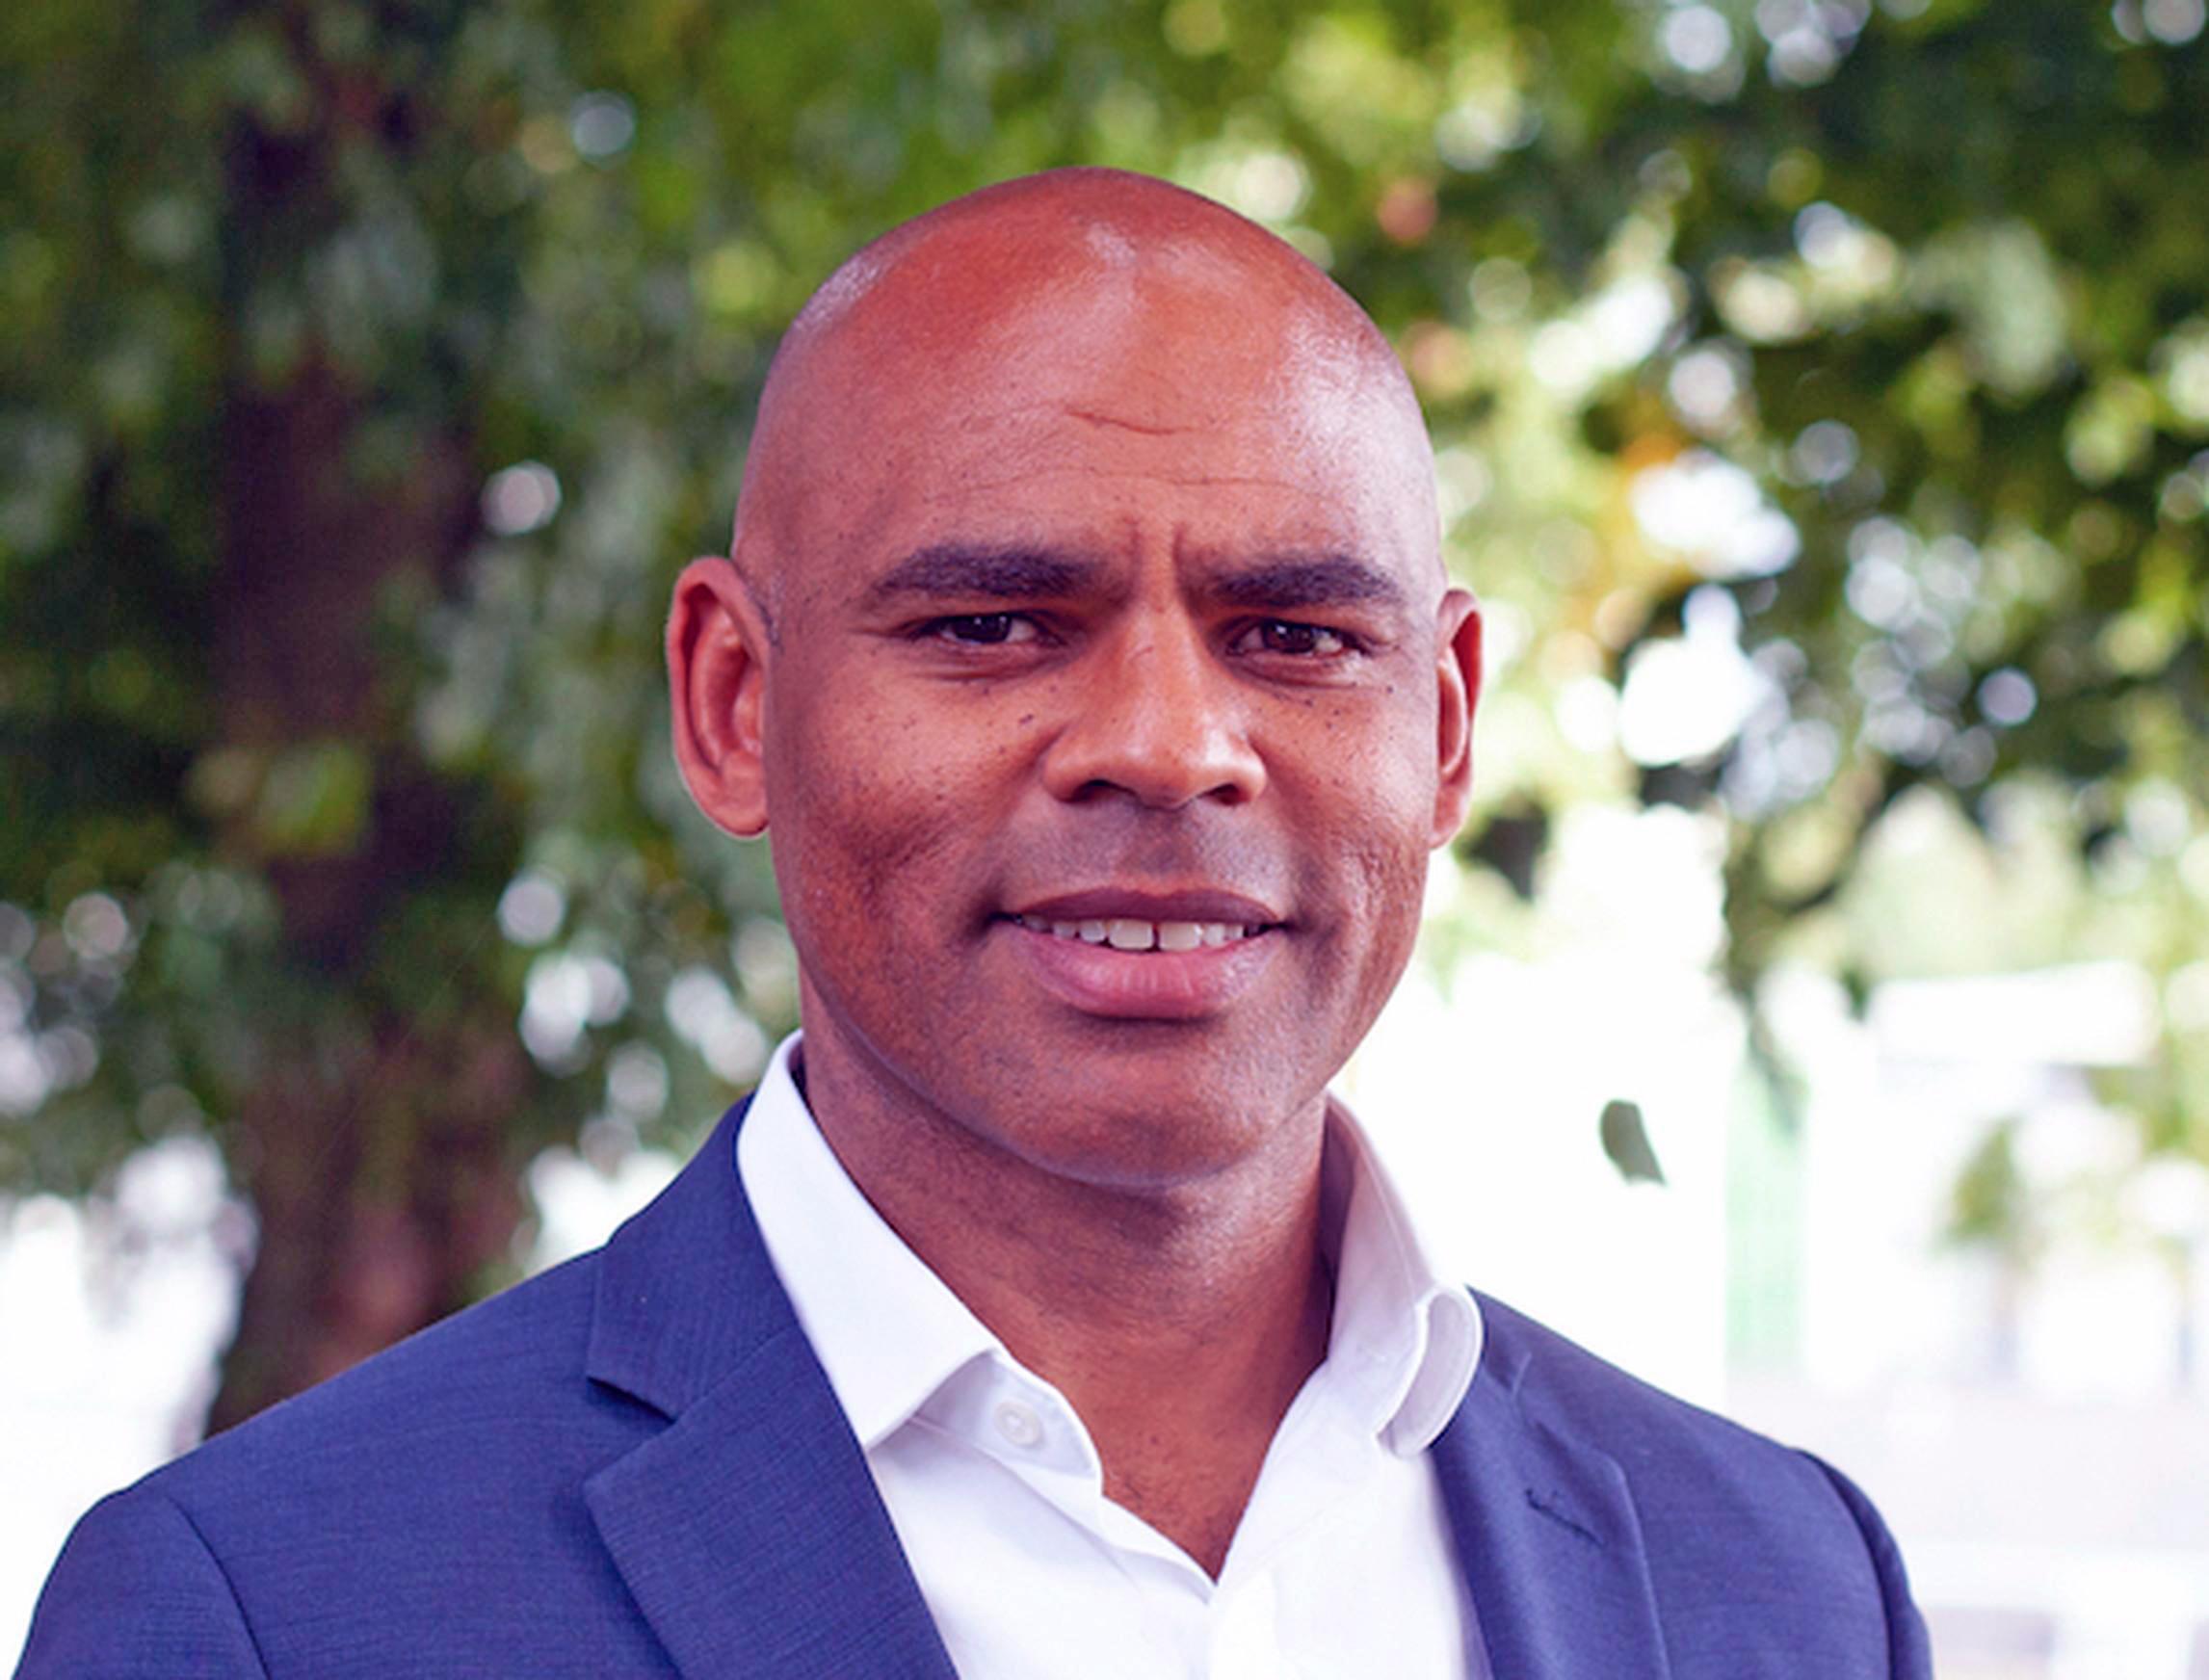 Bristol mayor Marvin Rees wants to scrap both proposed clean air zones